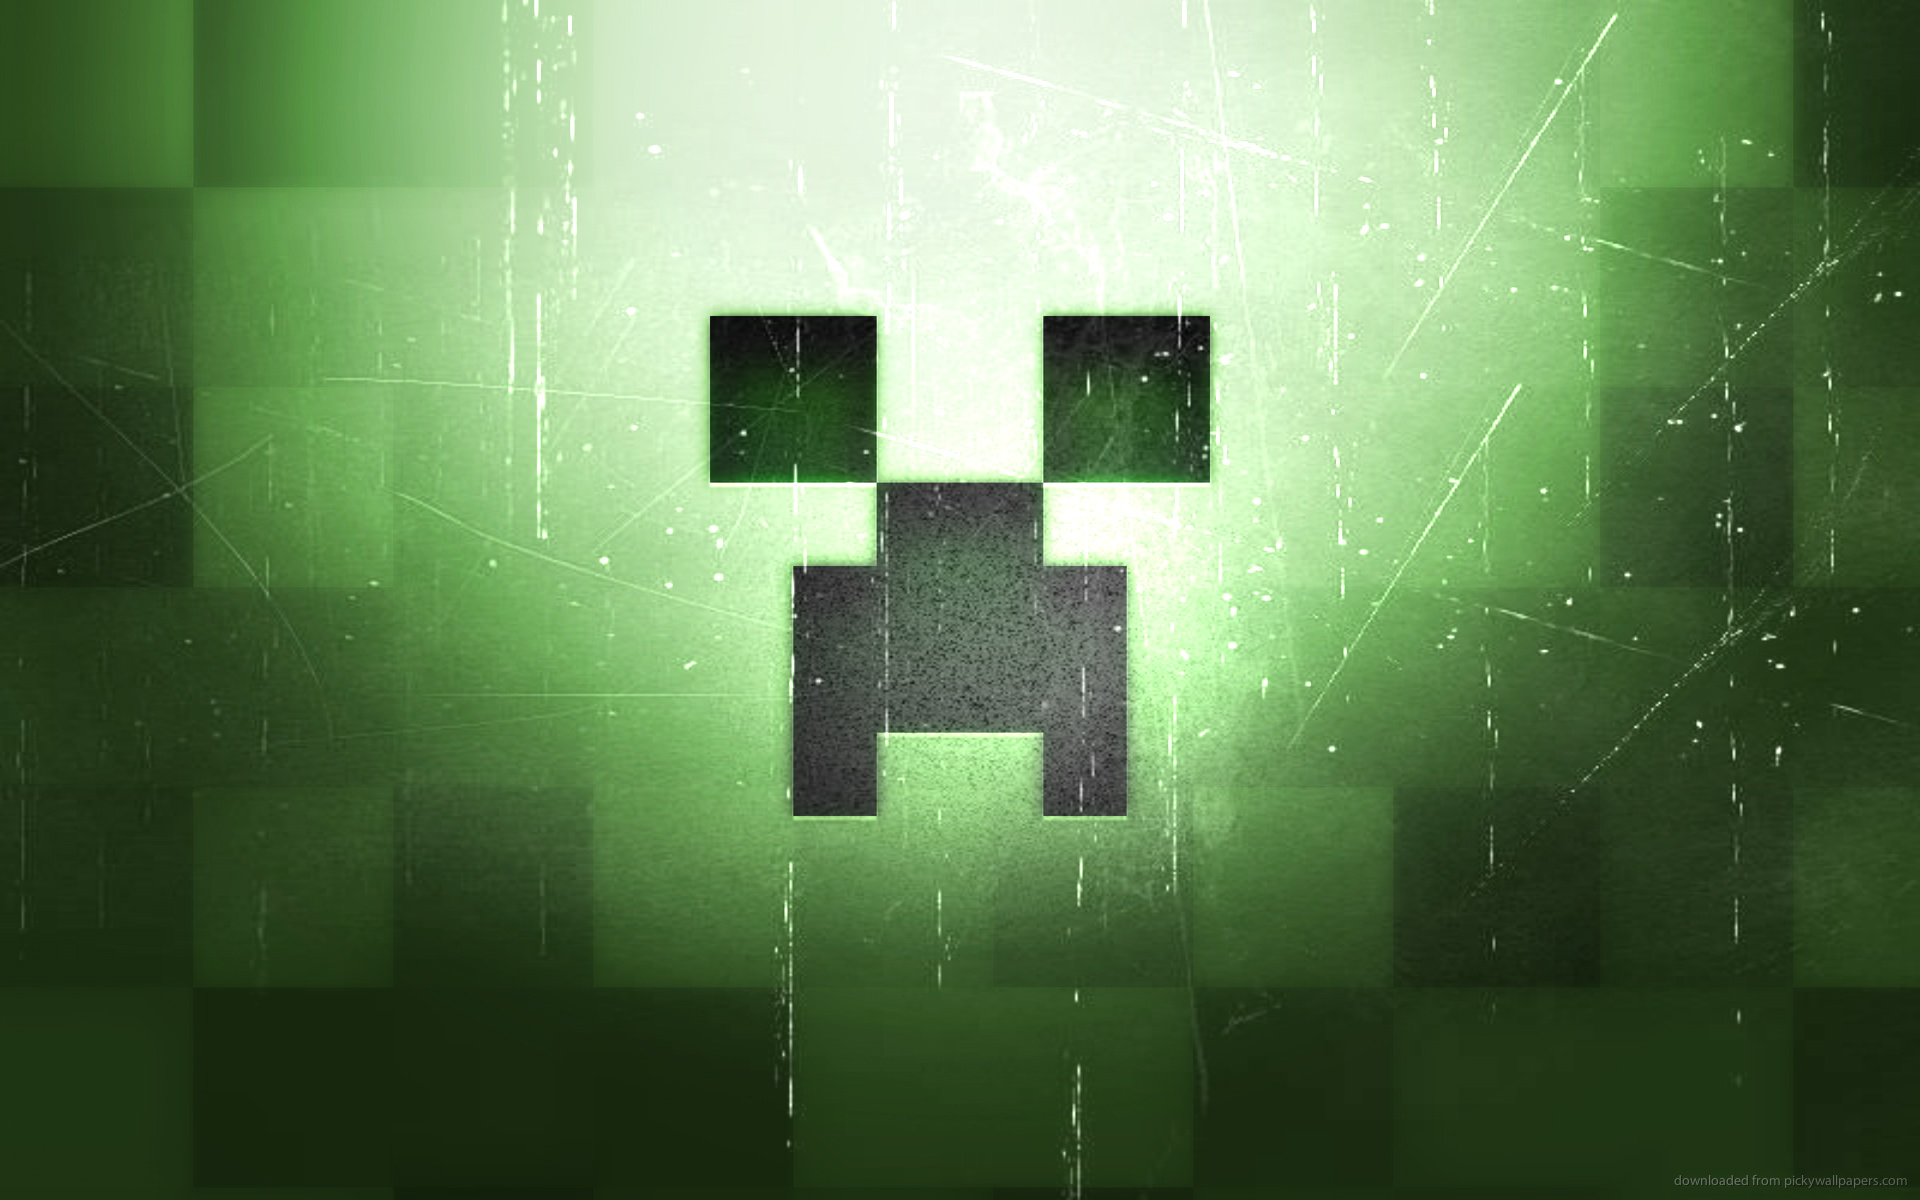 Download Black And Green Creeper Face 2560x1440 Minecraft